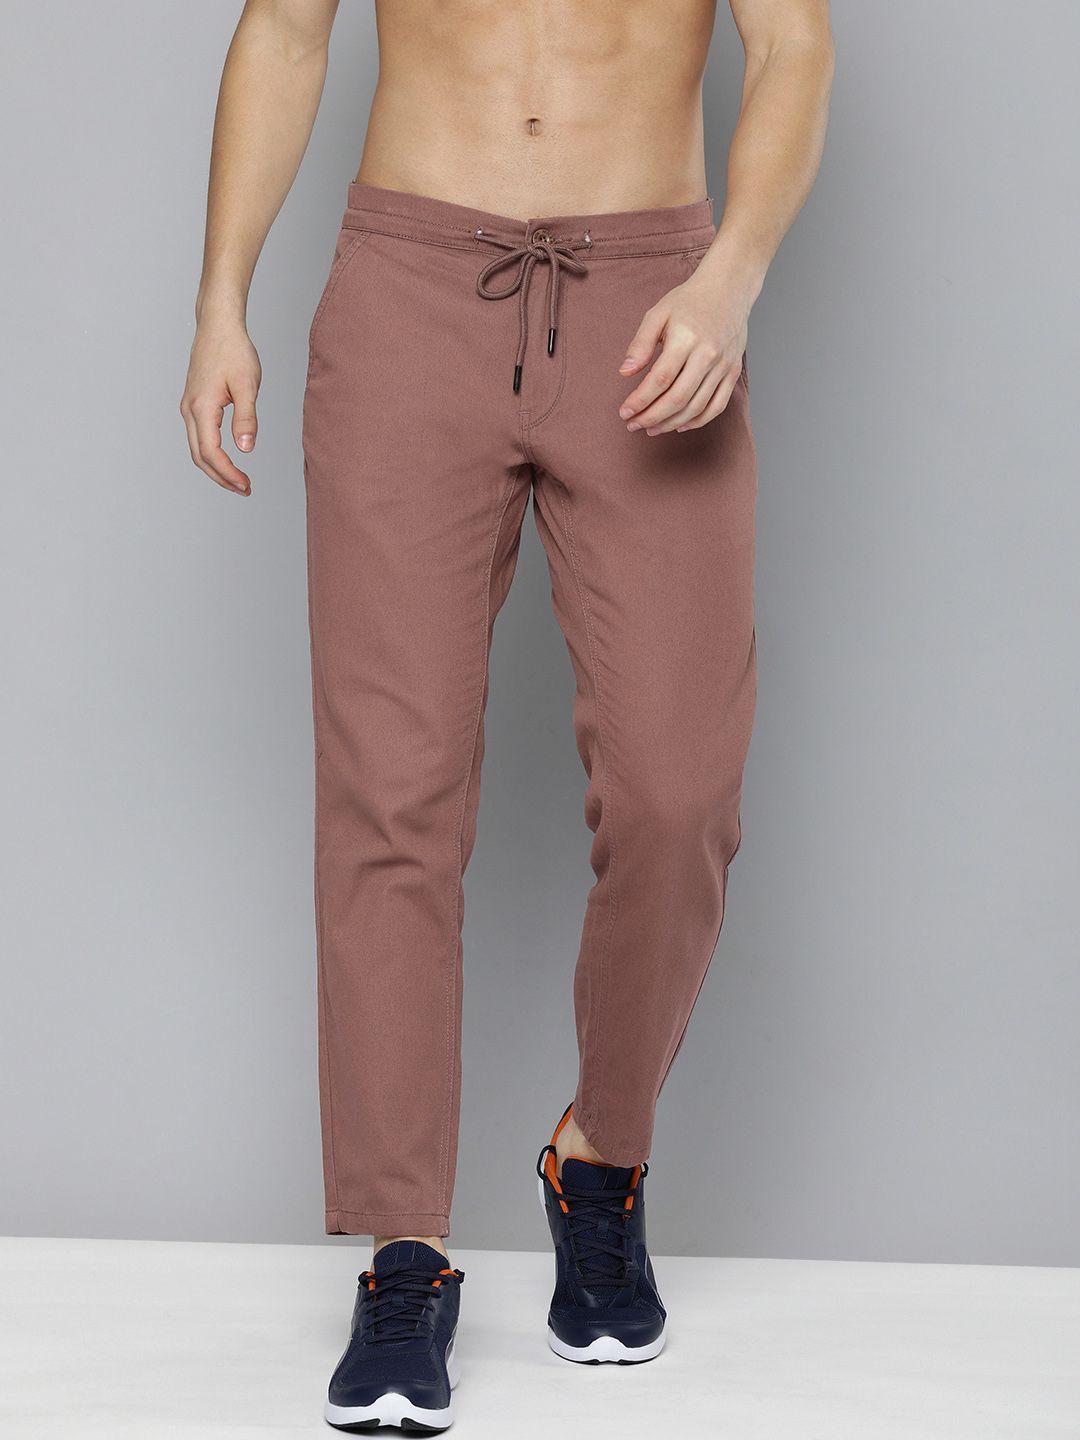 here&now-men-light-mauve-slim-fit-chinos-trousers